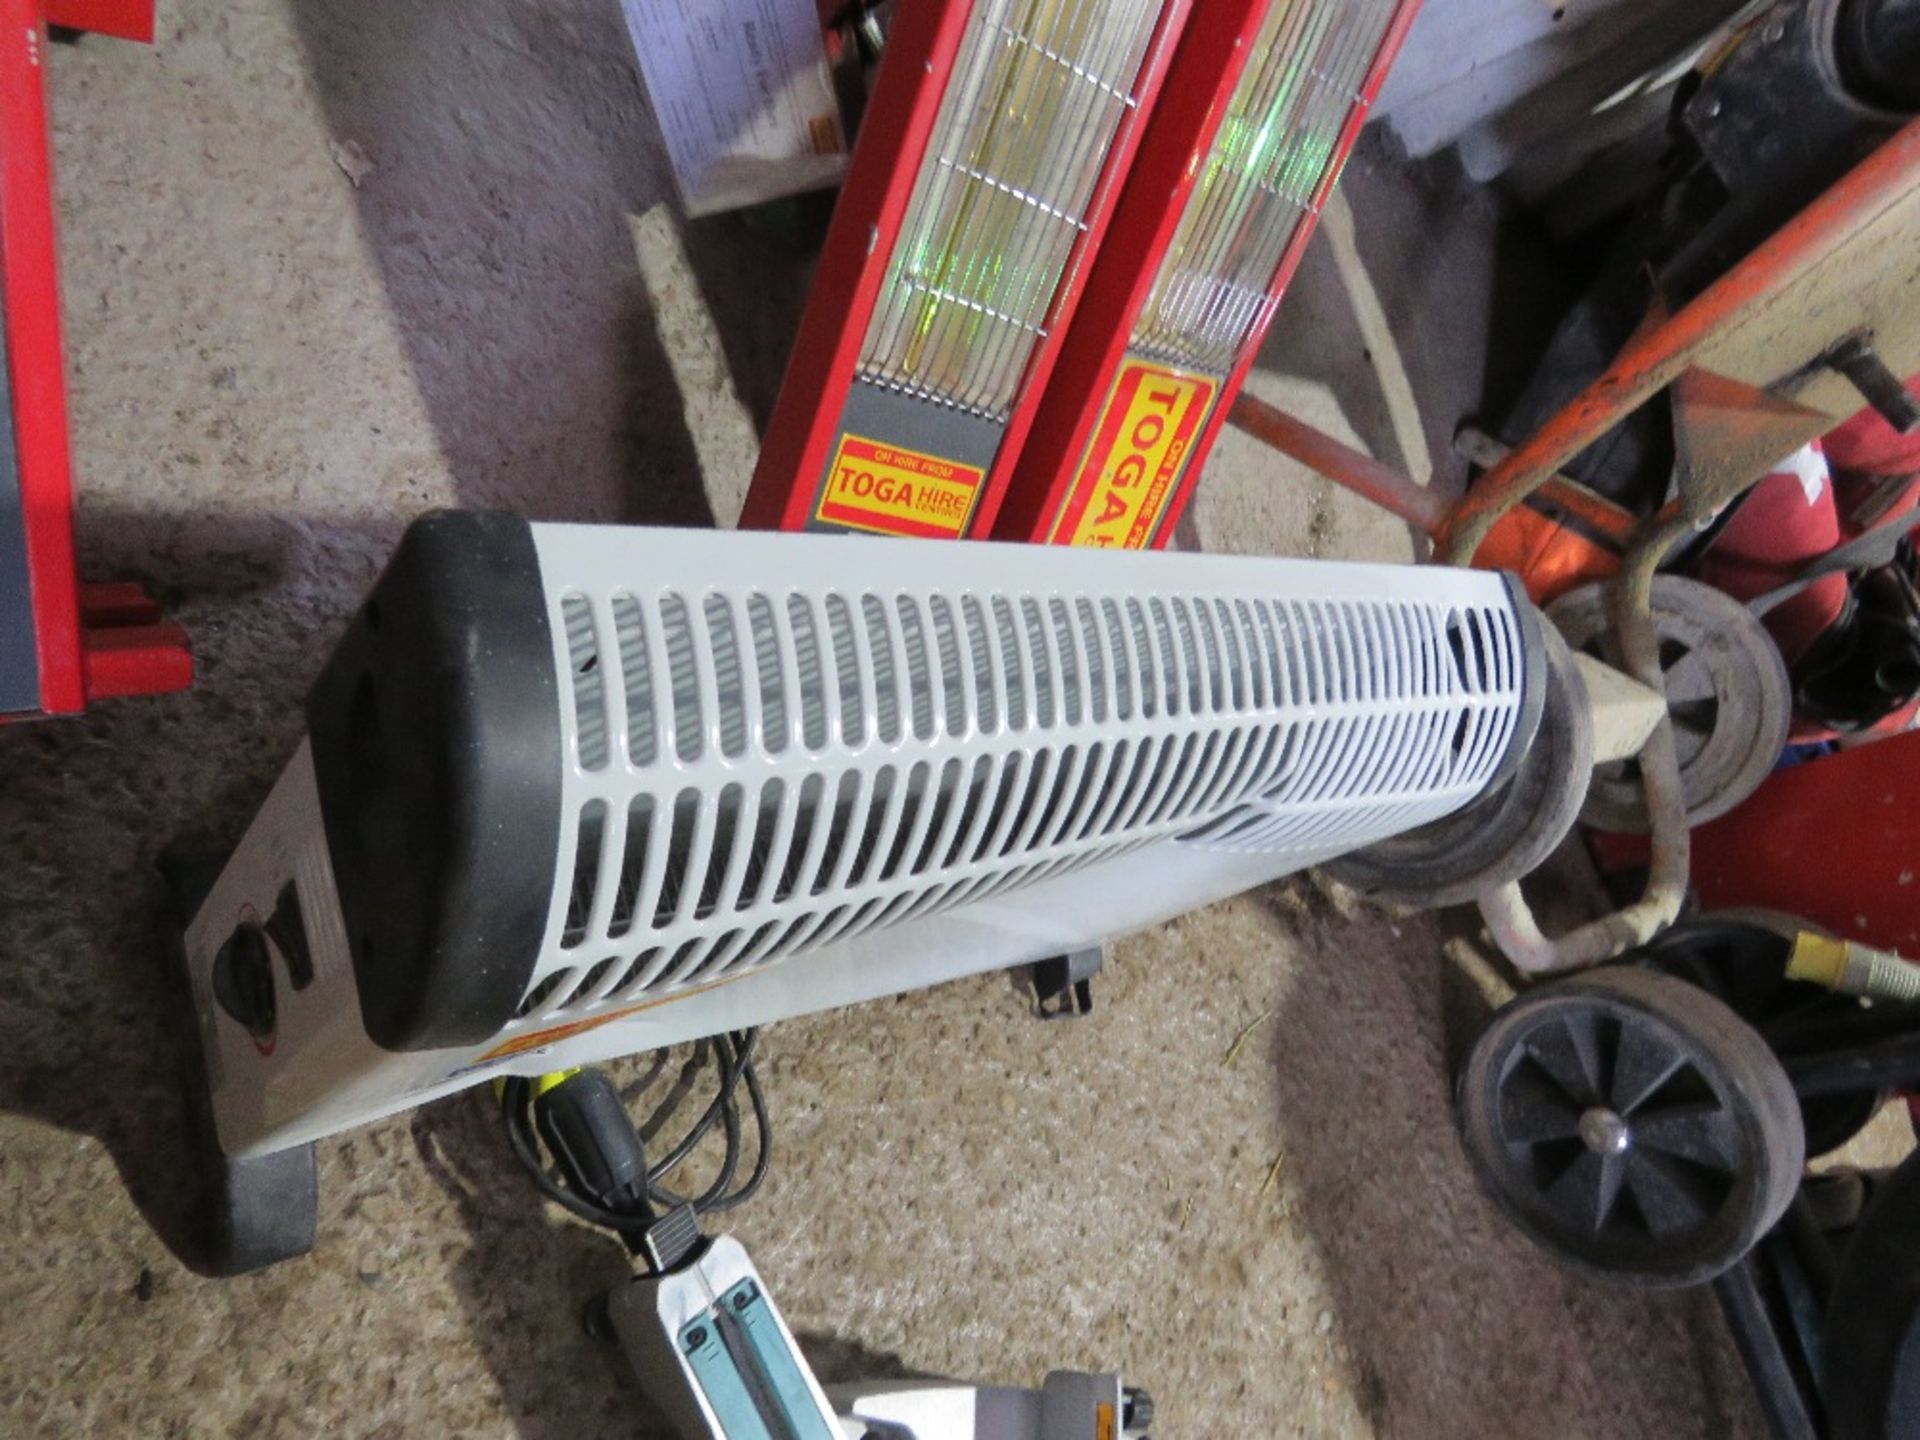 2 X 110 VOLT POWERED CUBE FAN HEATERS PLUS A 240VOLT RADIATOR. - Image 3 of 5